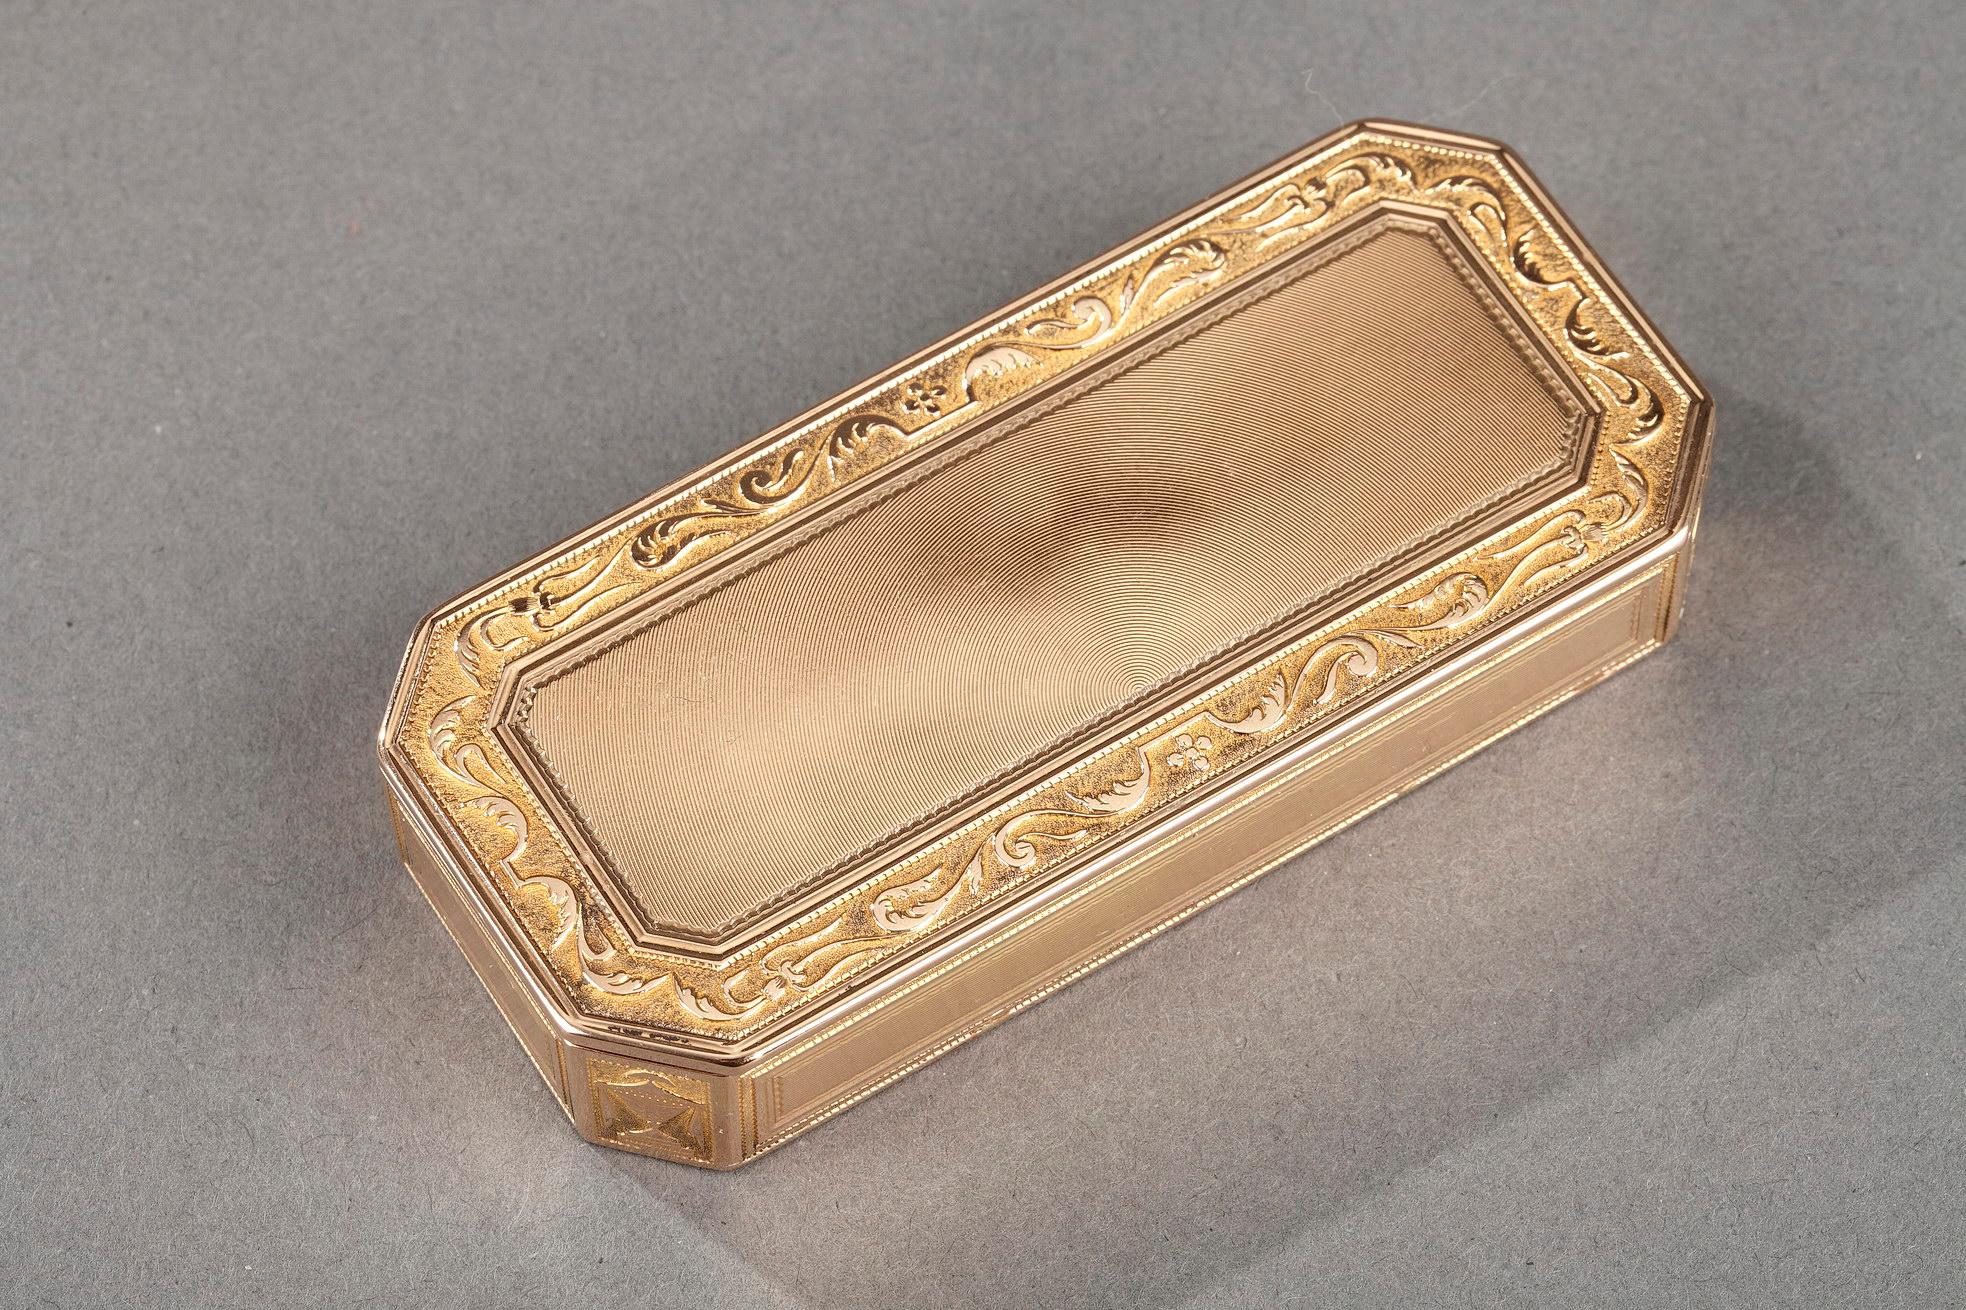 Rectangular gold box with cut sides. The hinged gold lid is adorned with concentric lines framed by a floral frieze of foliage on amati gold background. The frame is composed of four panels adorned with with parallel stripes and in the angles with